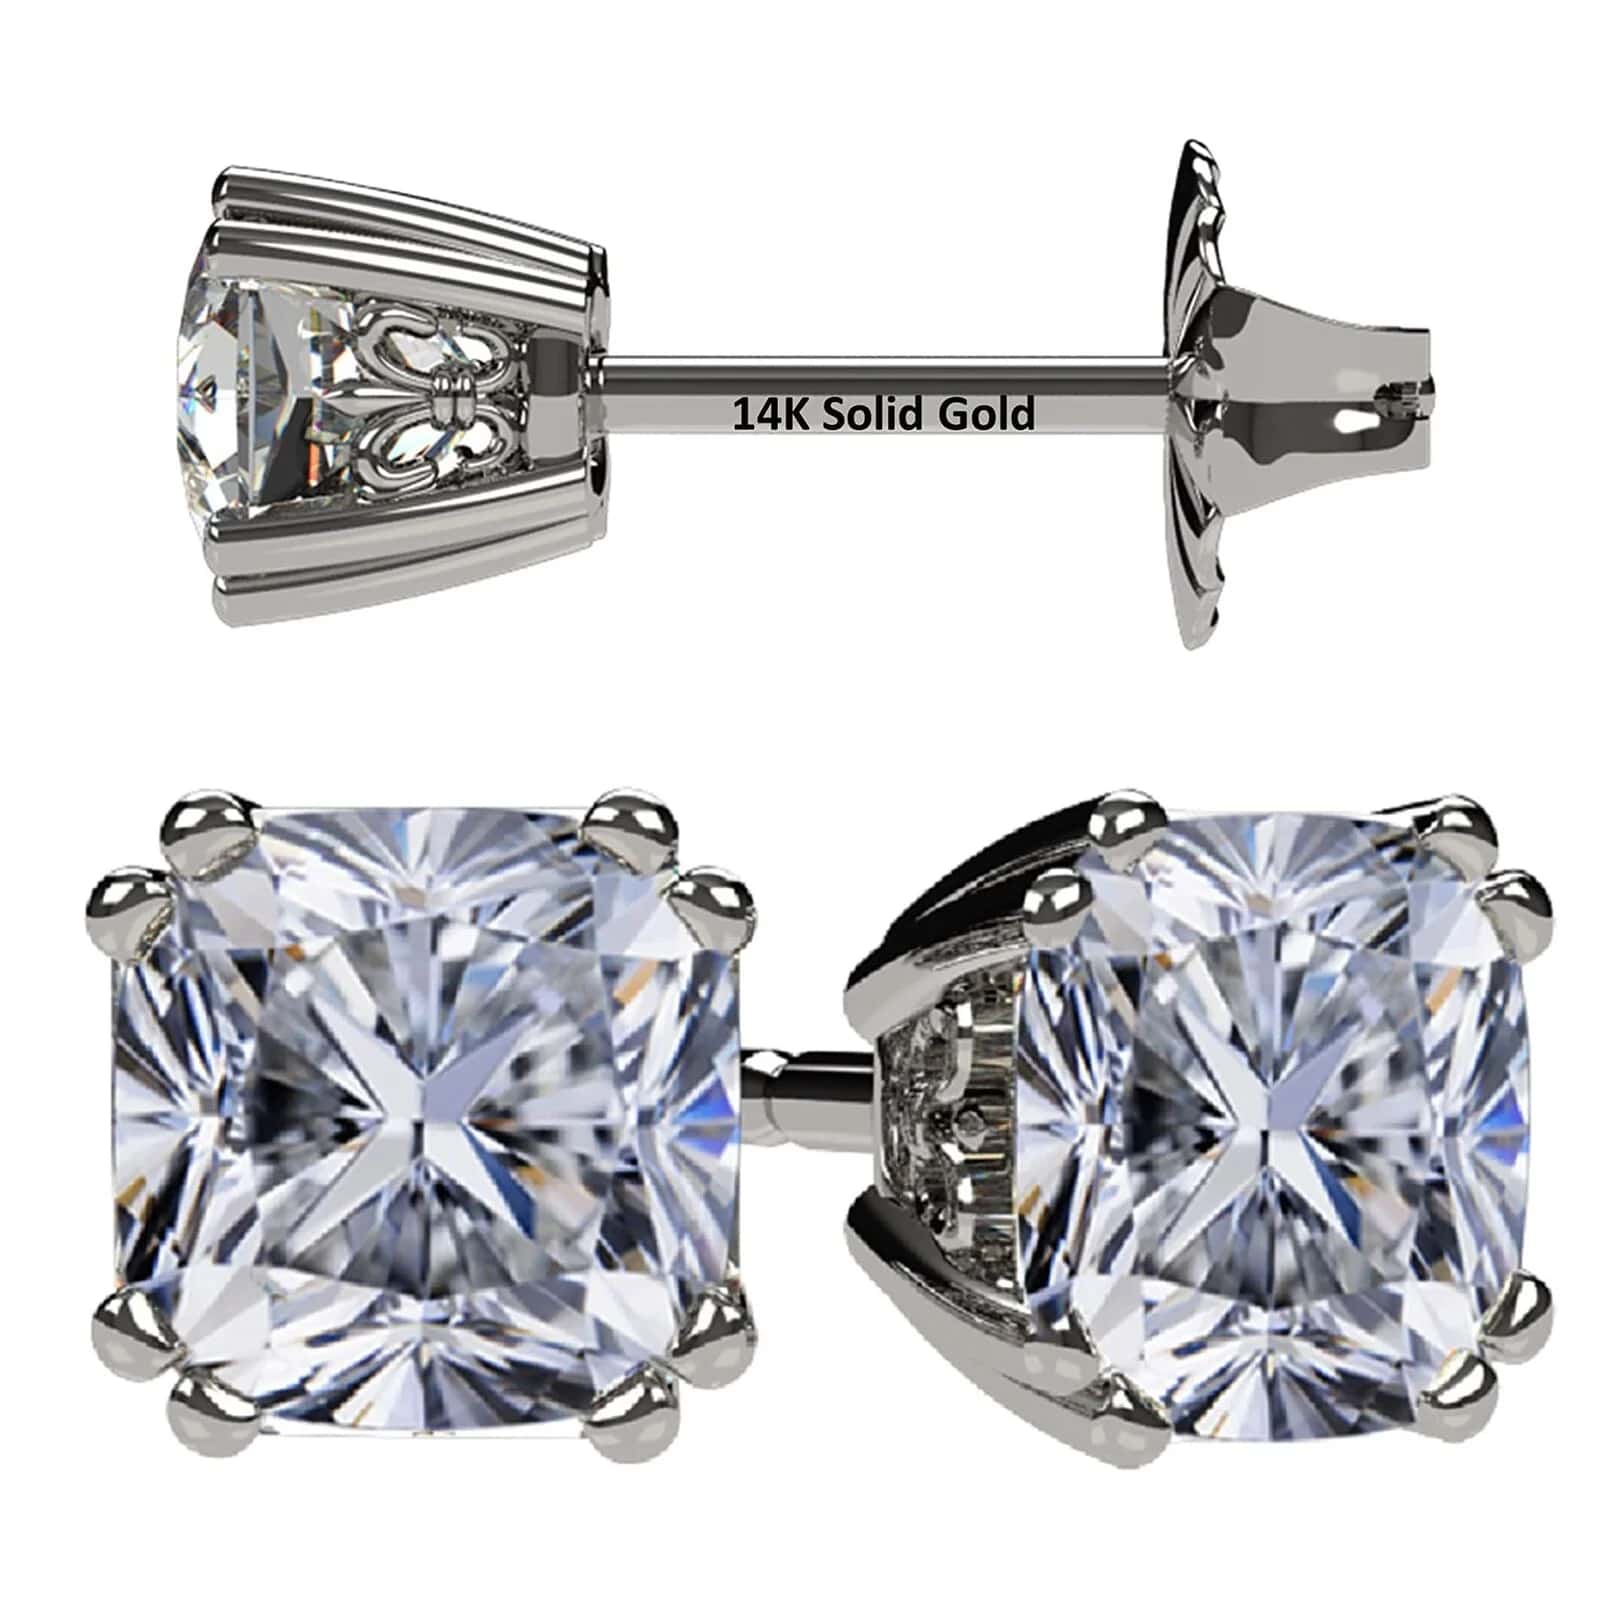  Outstanding NANA Jewels Cushion CZ Stud Earrings - Silver & 14K Gold Post, 1.20cttw Platinum Plated